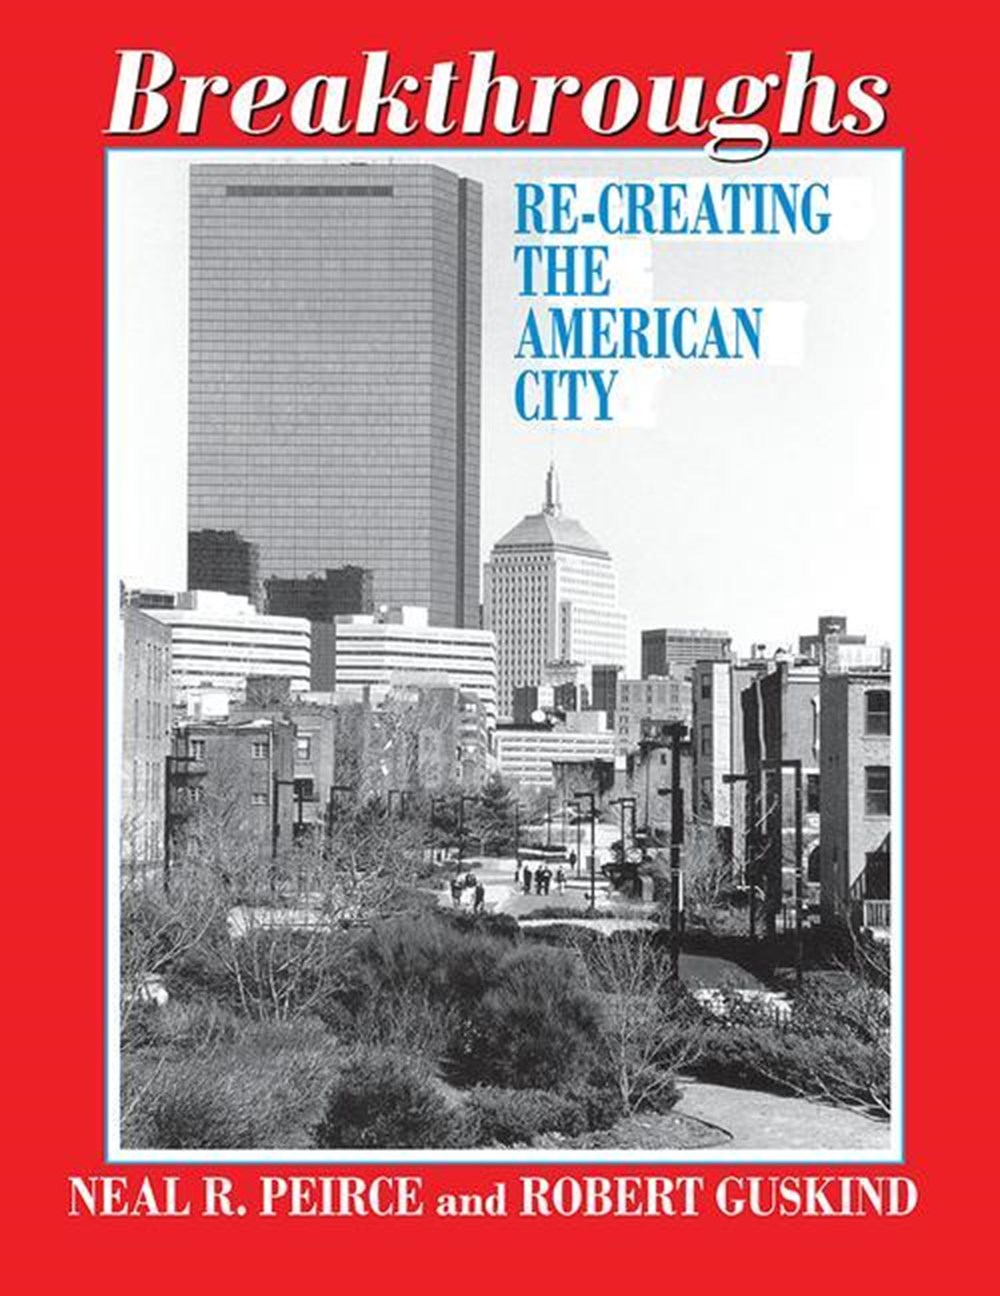 Breakthroughs: Re-Creating the American City